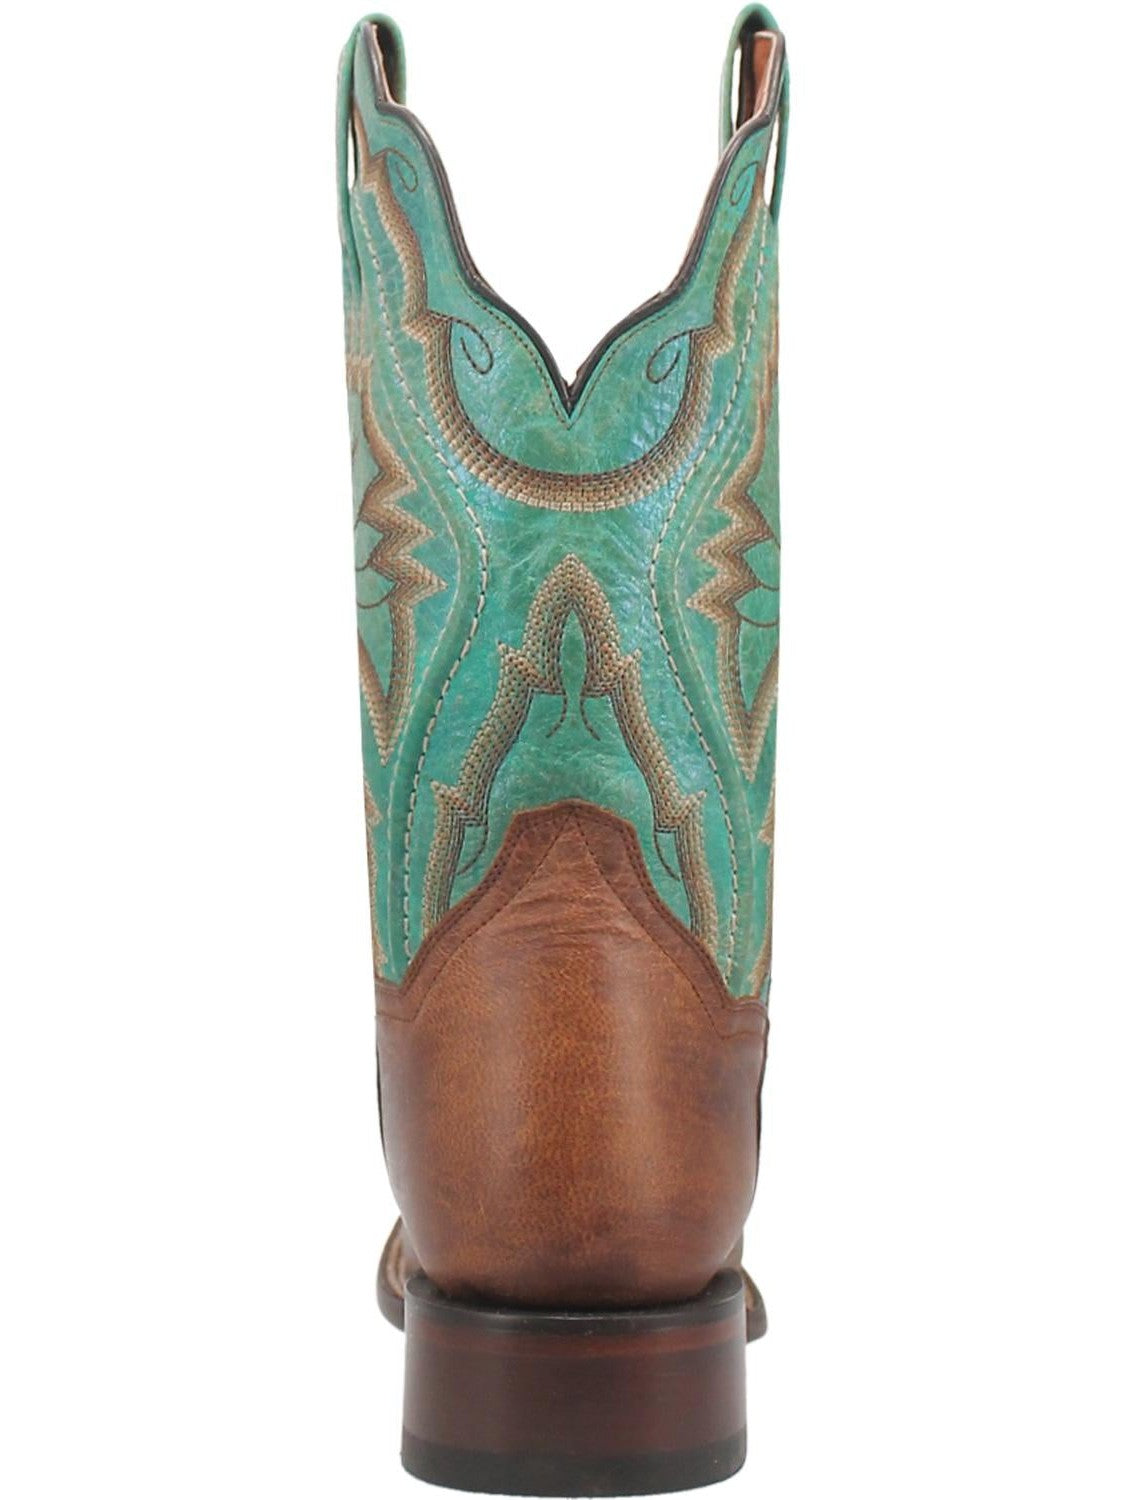 Babs Square Toe Boot by Dan Post - Brown and Teal